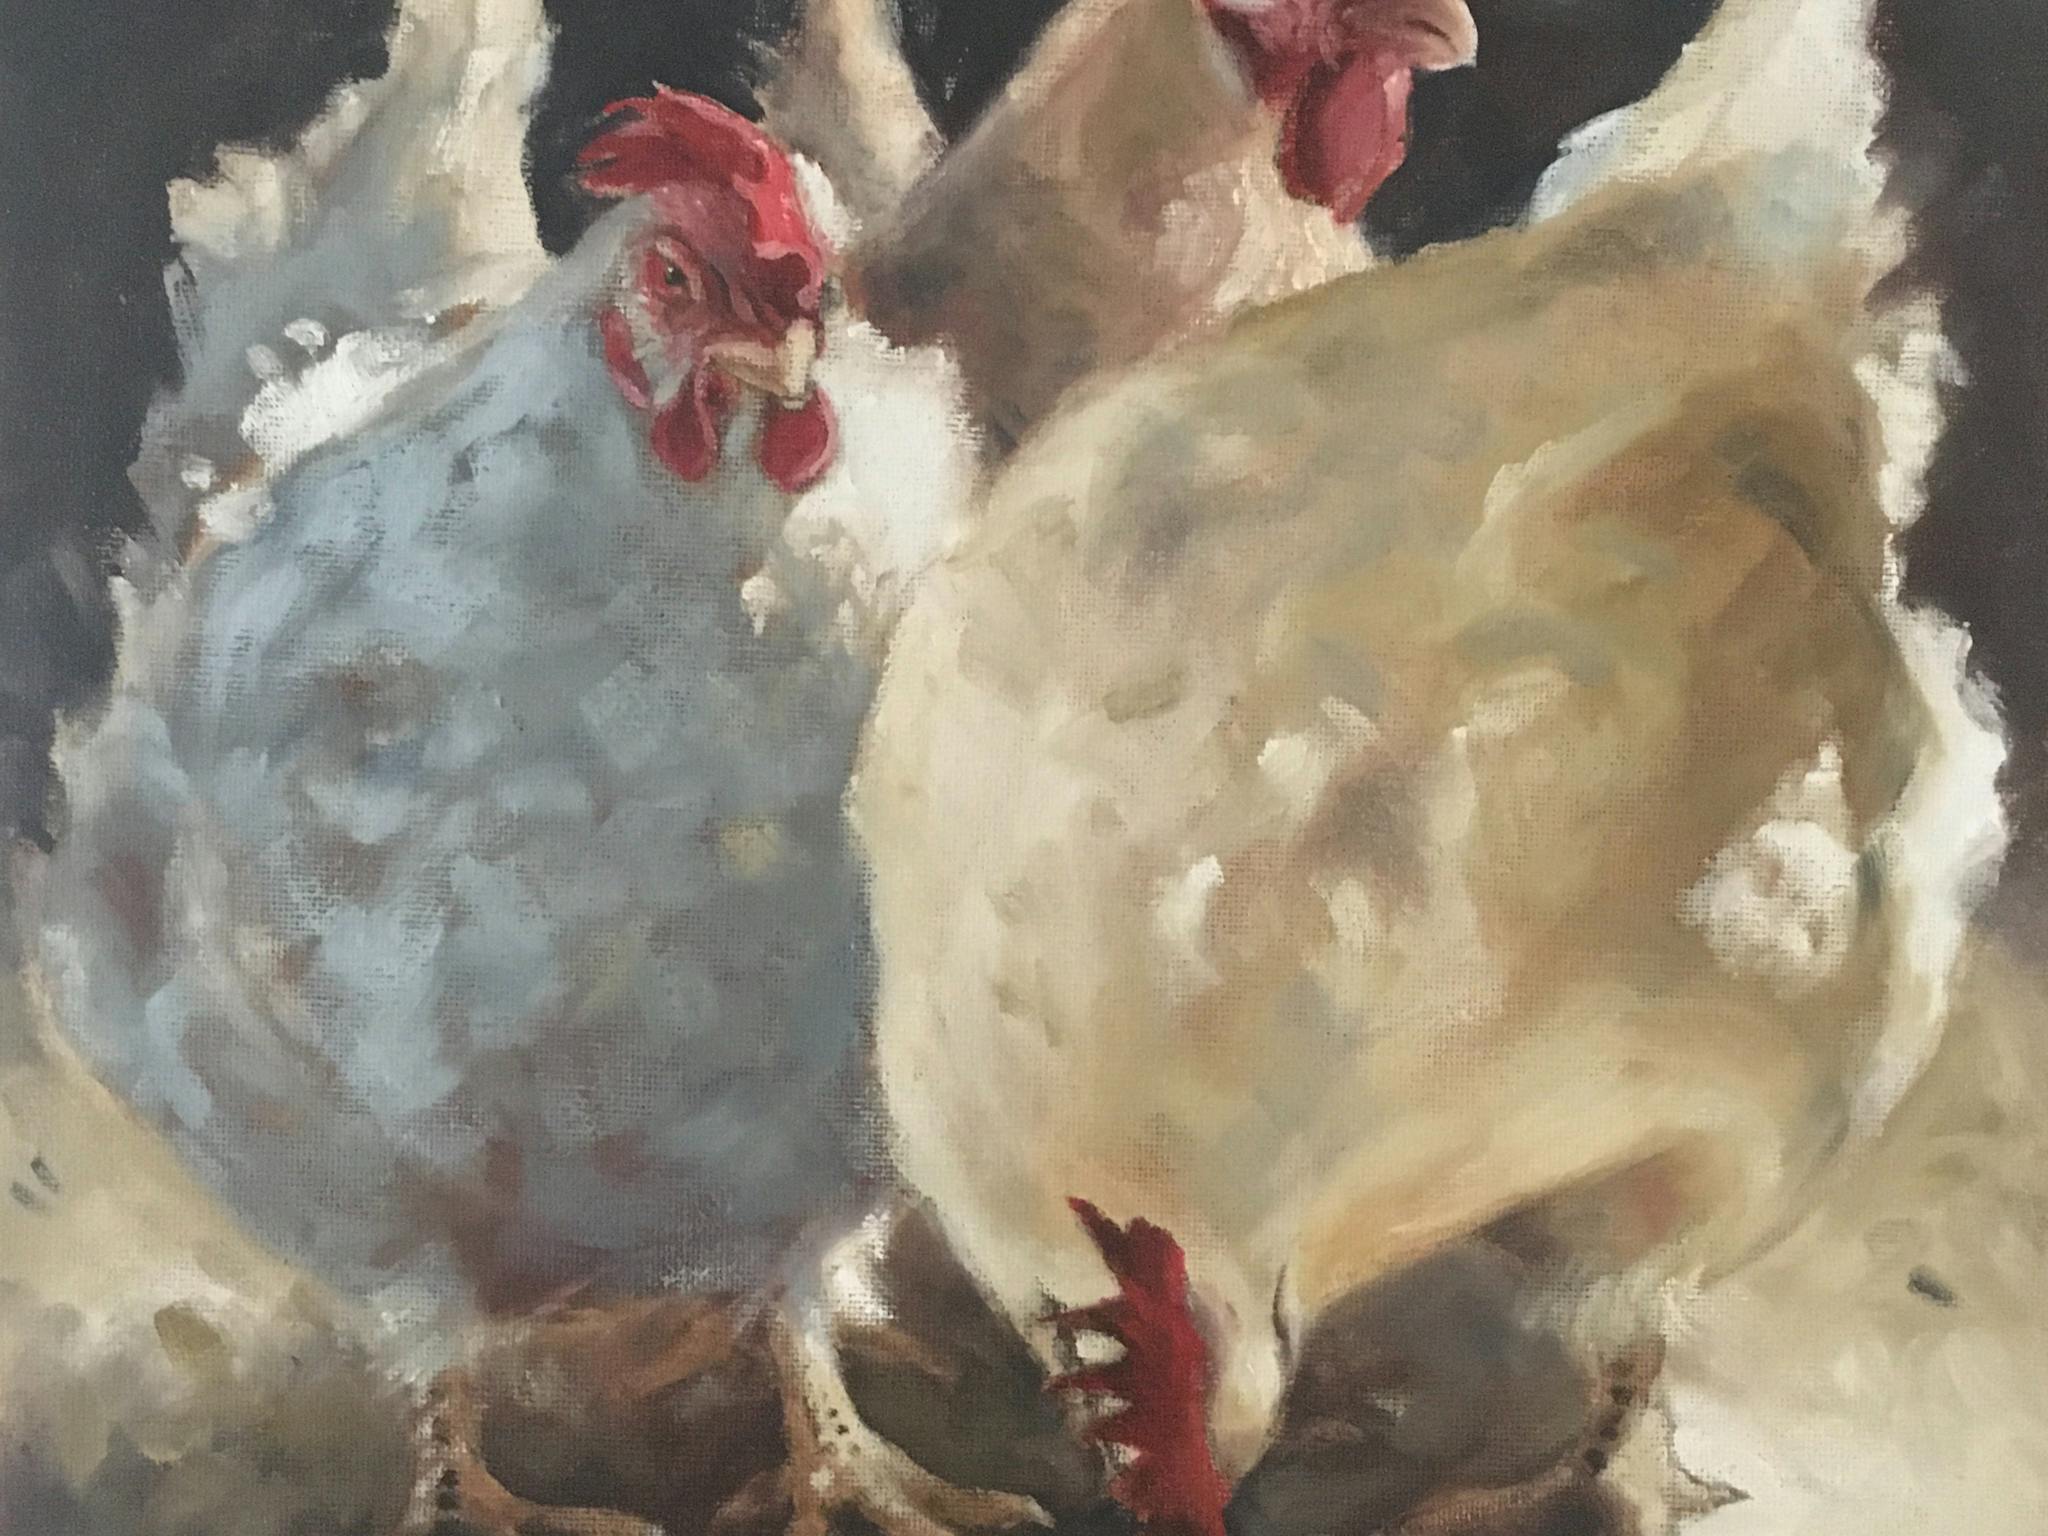 Chooks are another favourite subject